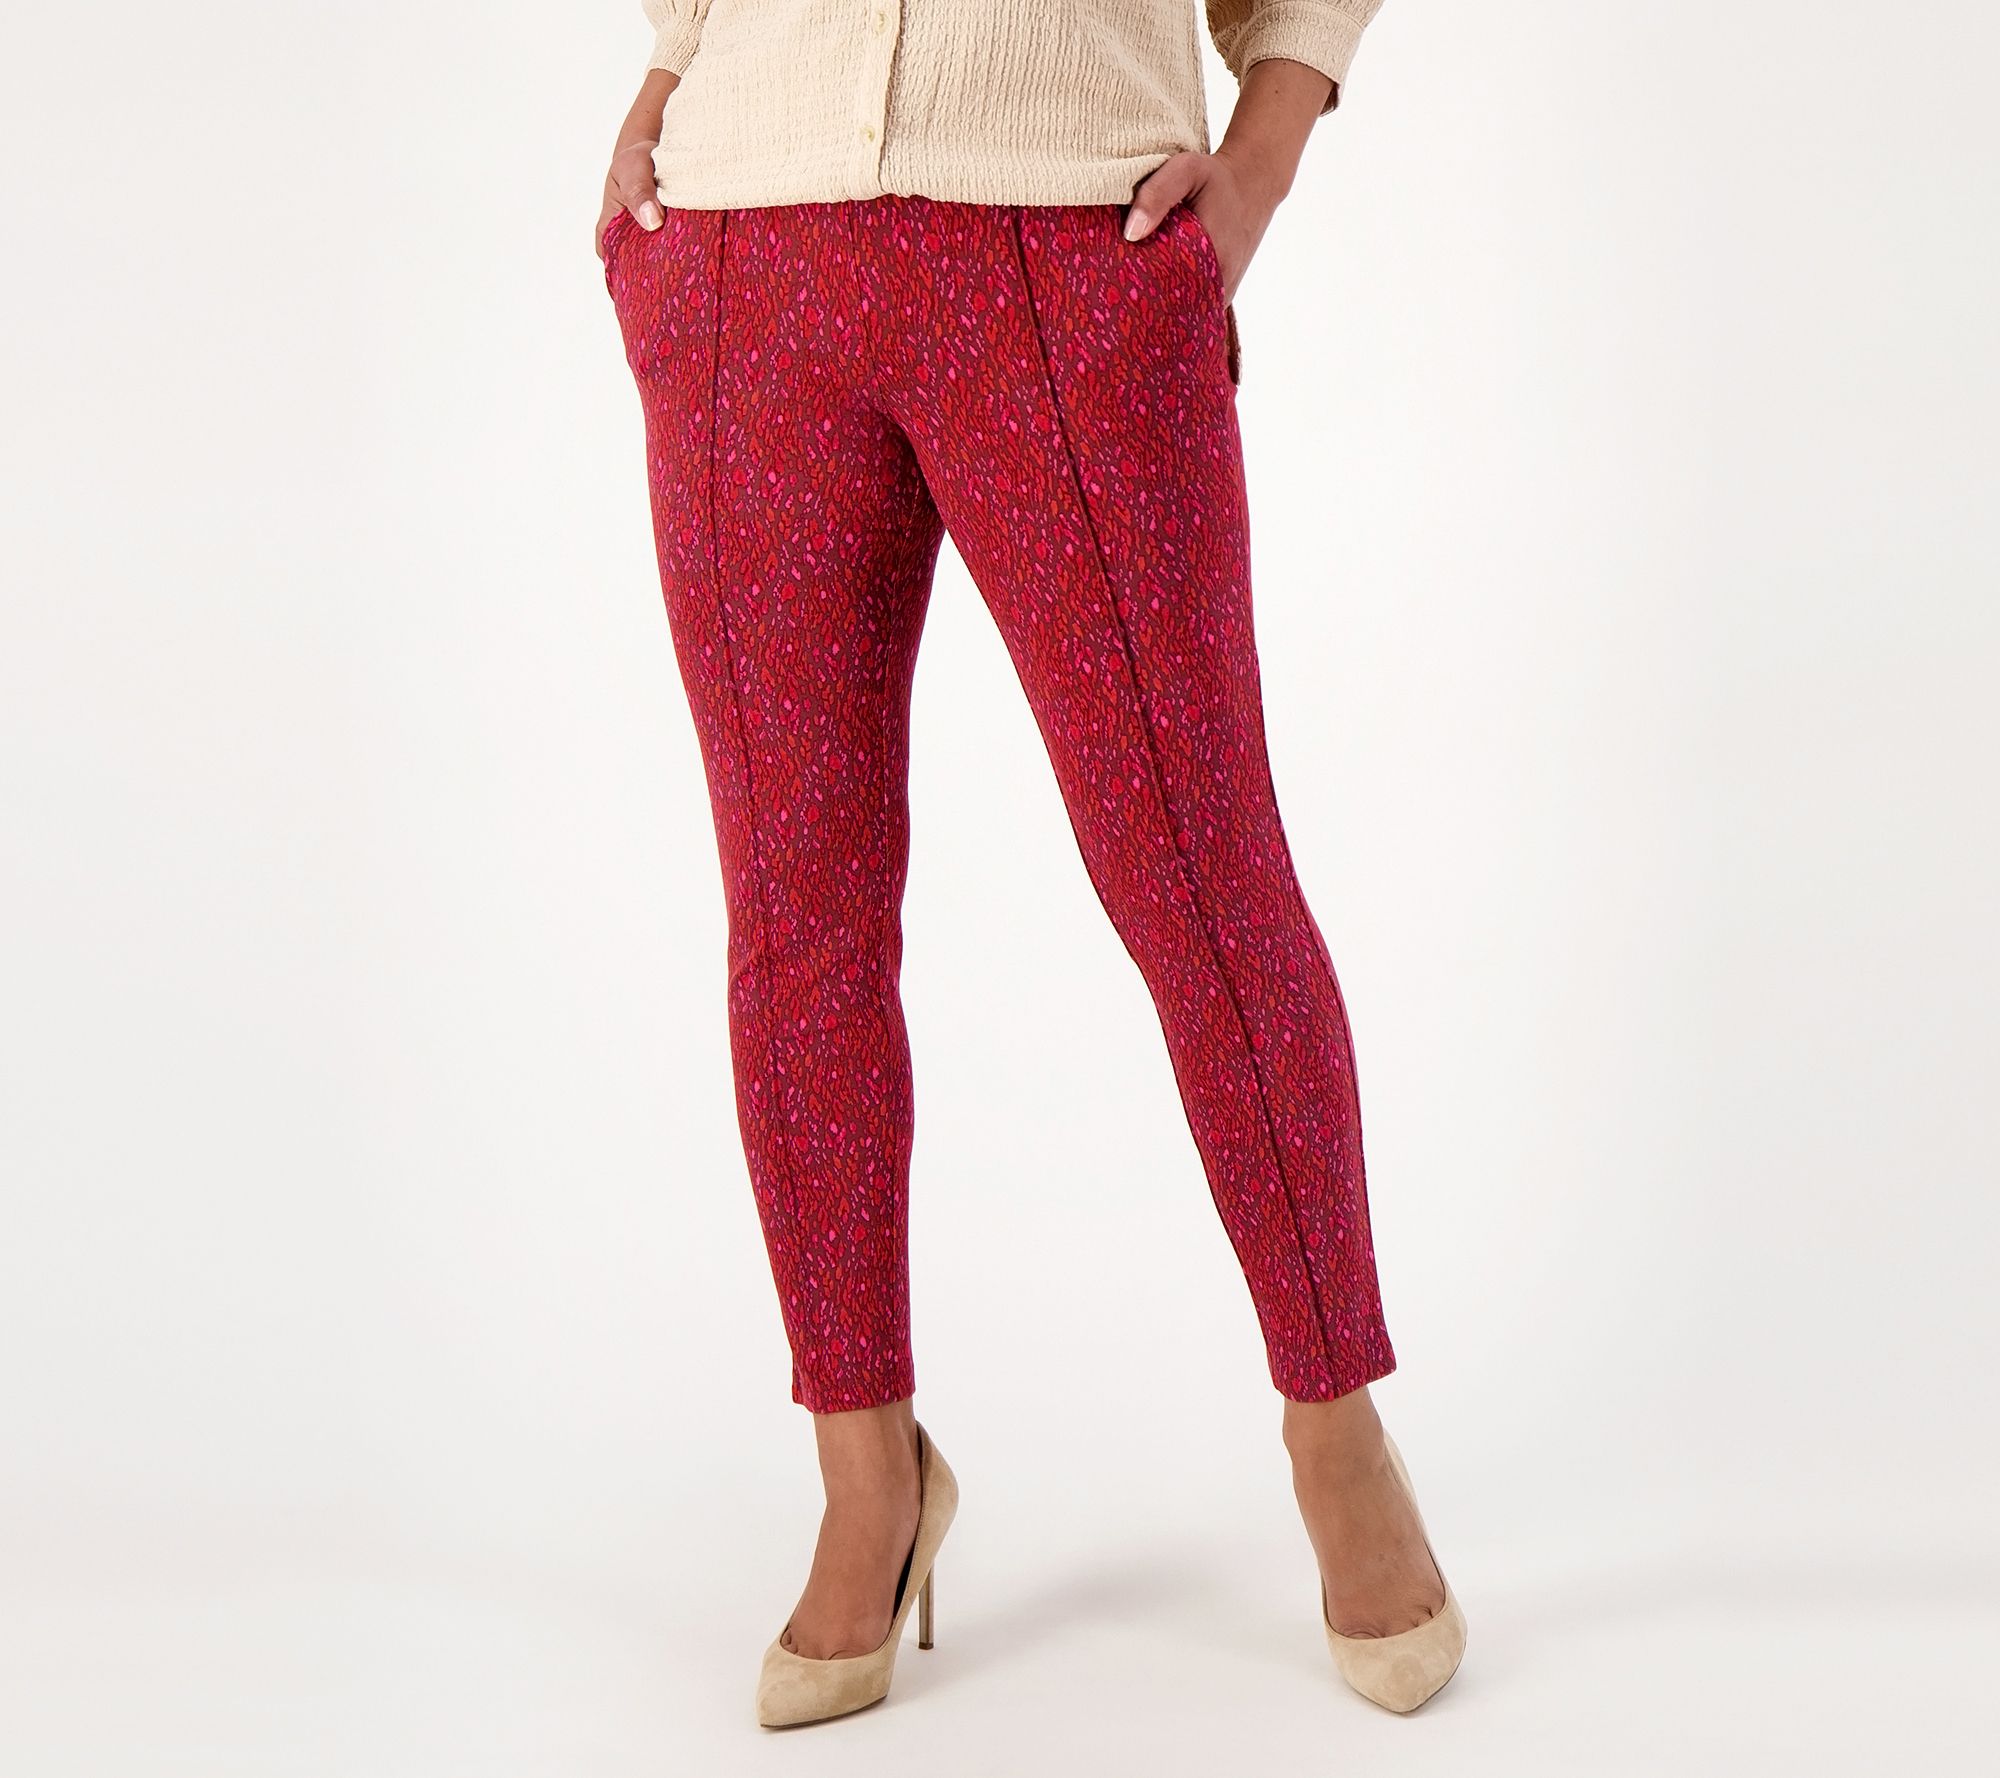 Clothing & Shoes - Bottoms - Pants - Isaac Mizrahi New York Slim 5-Pocket  Pull On Ponte Ankle Pant - Online Shopping for Canadians